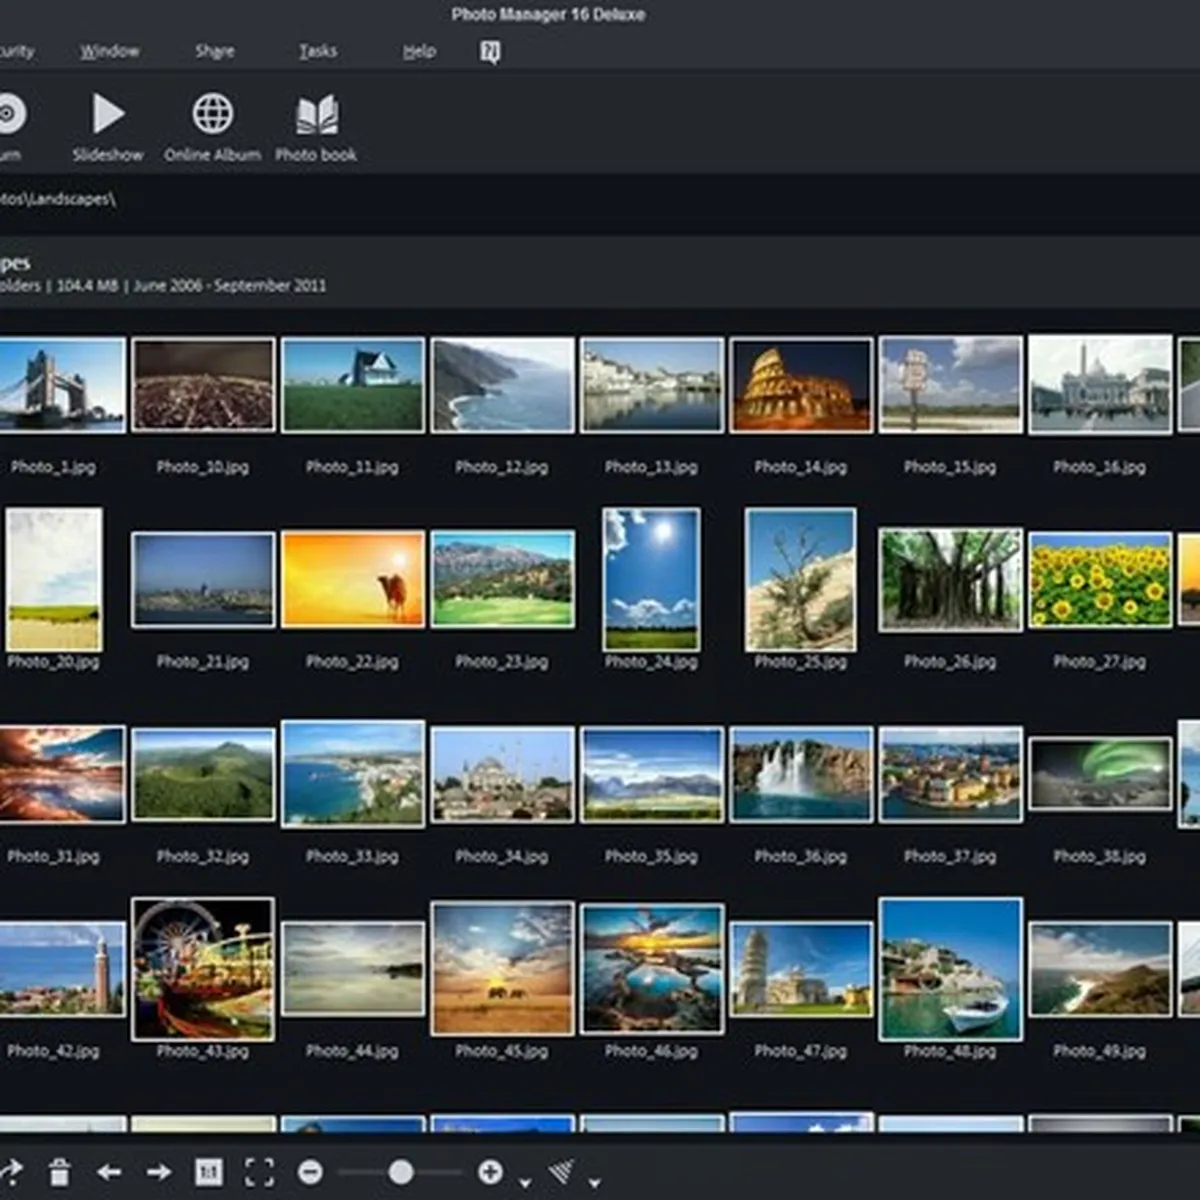 MagiX Photo Manager Review